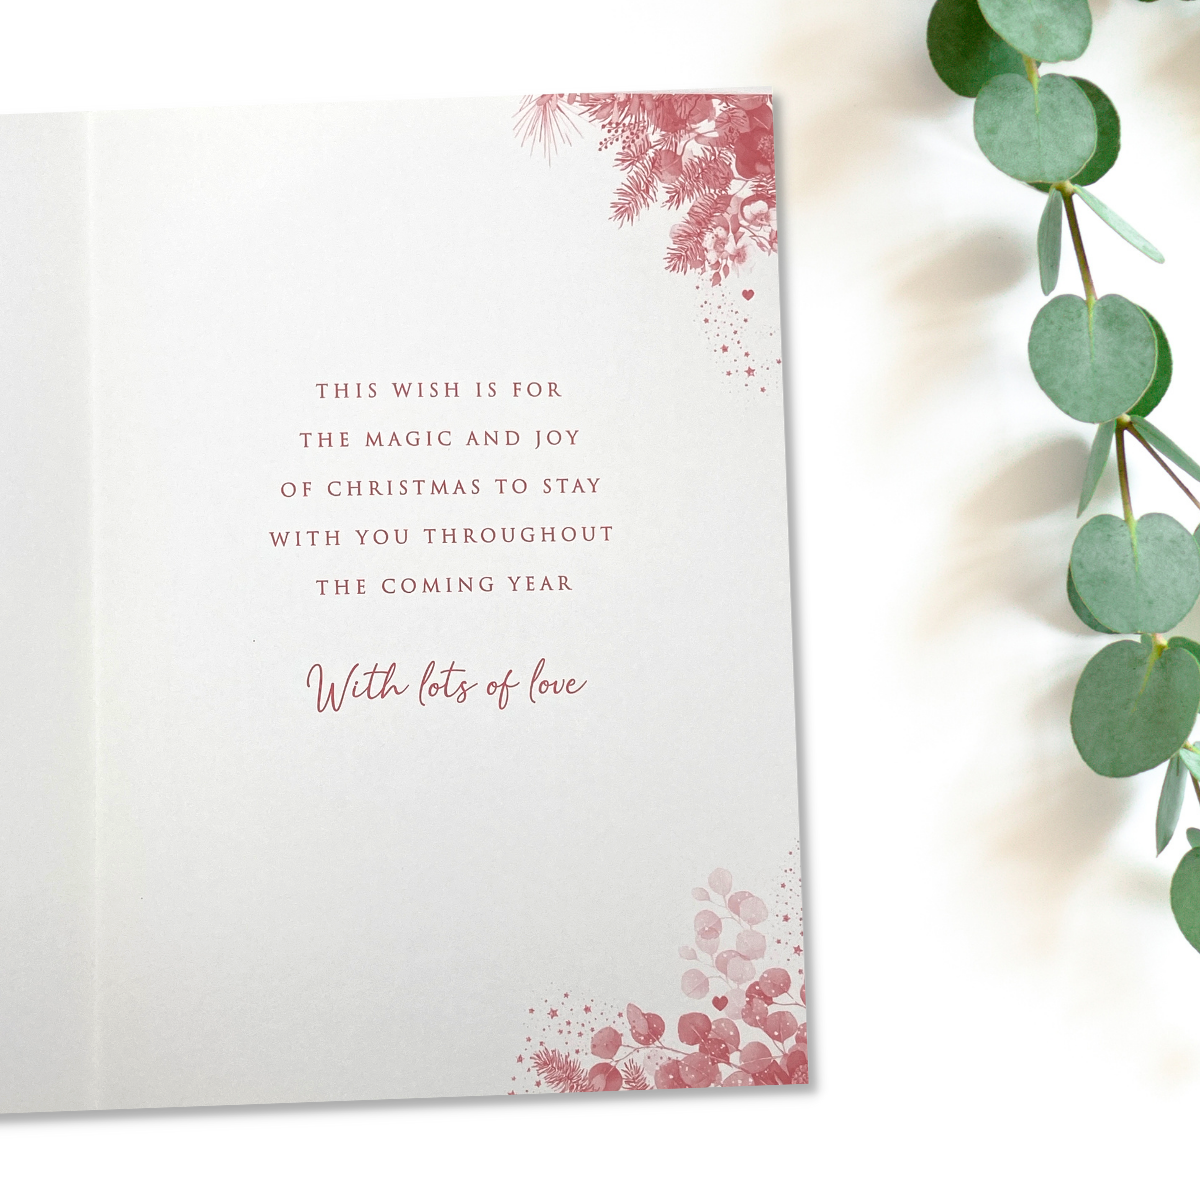 Inside image with red floral border and verse